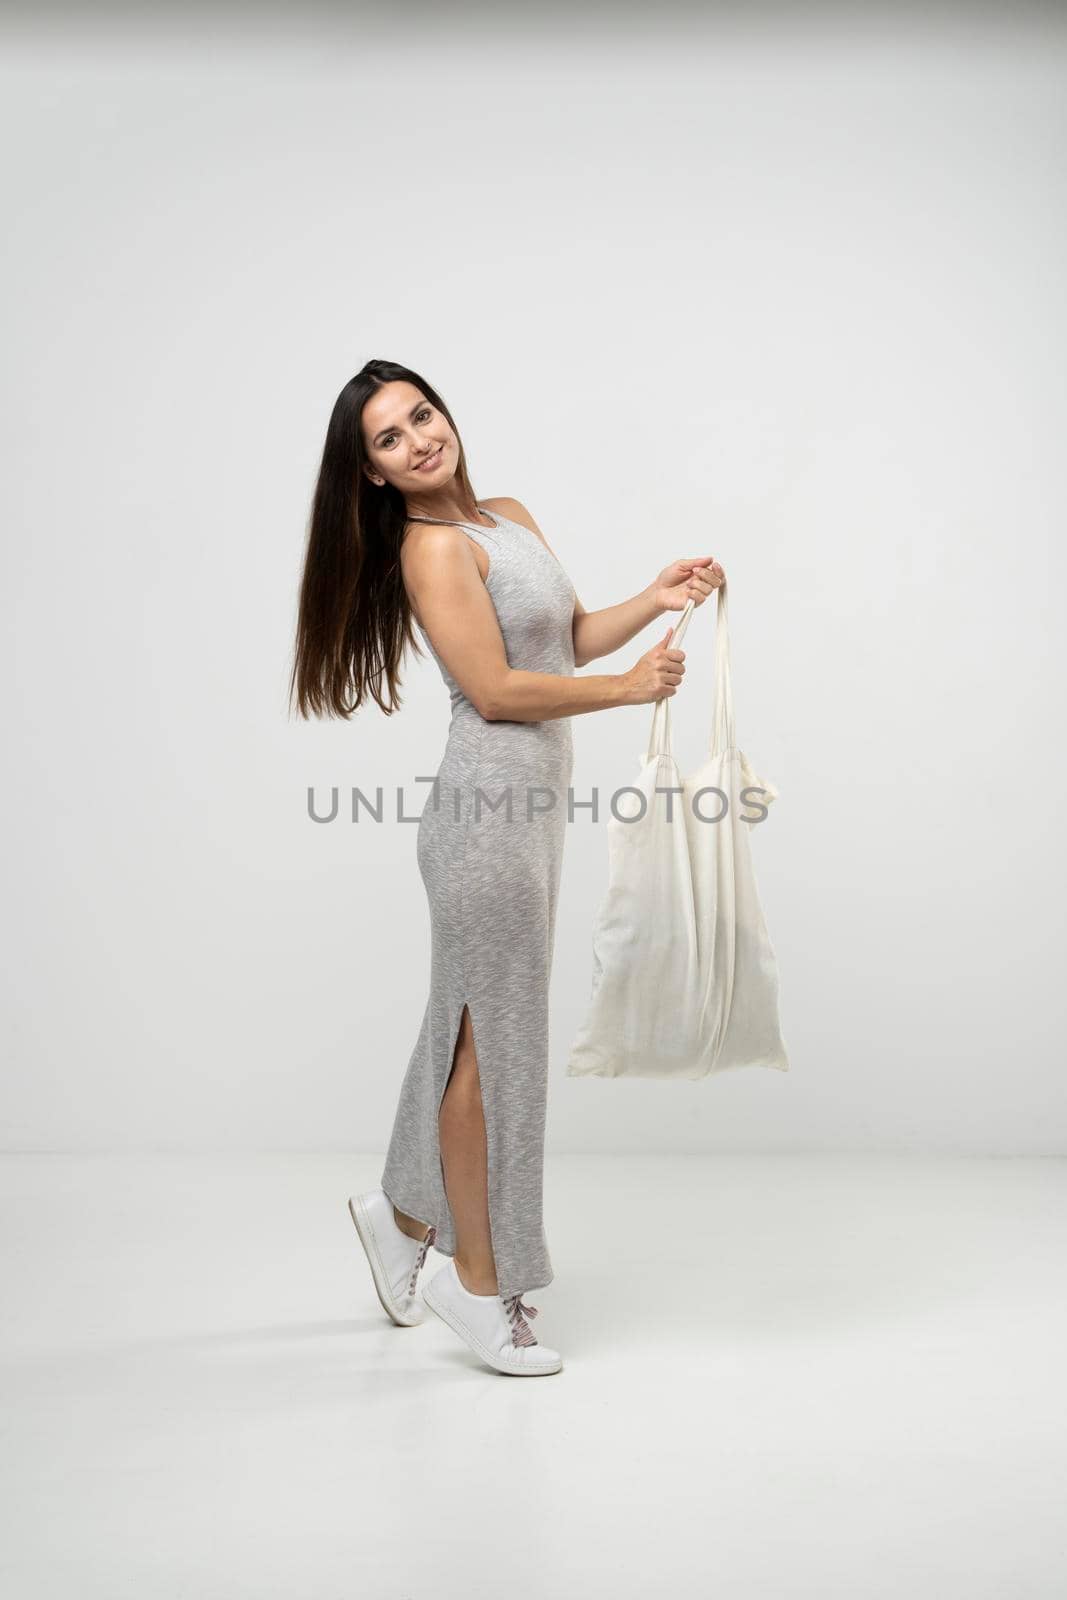 Brunette woman in a grey dress holding cotton shopper bag with groceries over white background. Rejection of plastic. Zero waste concept. by vovsht